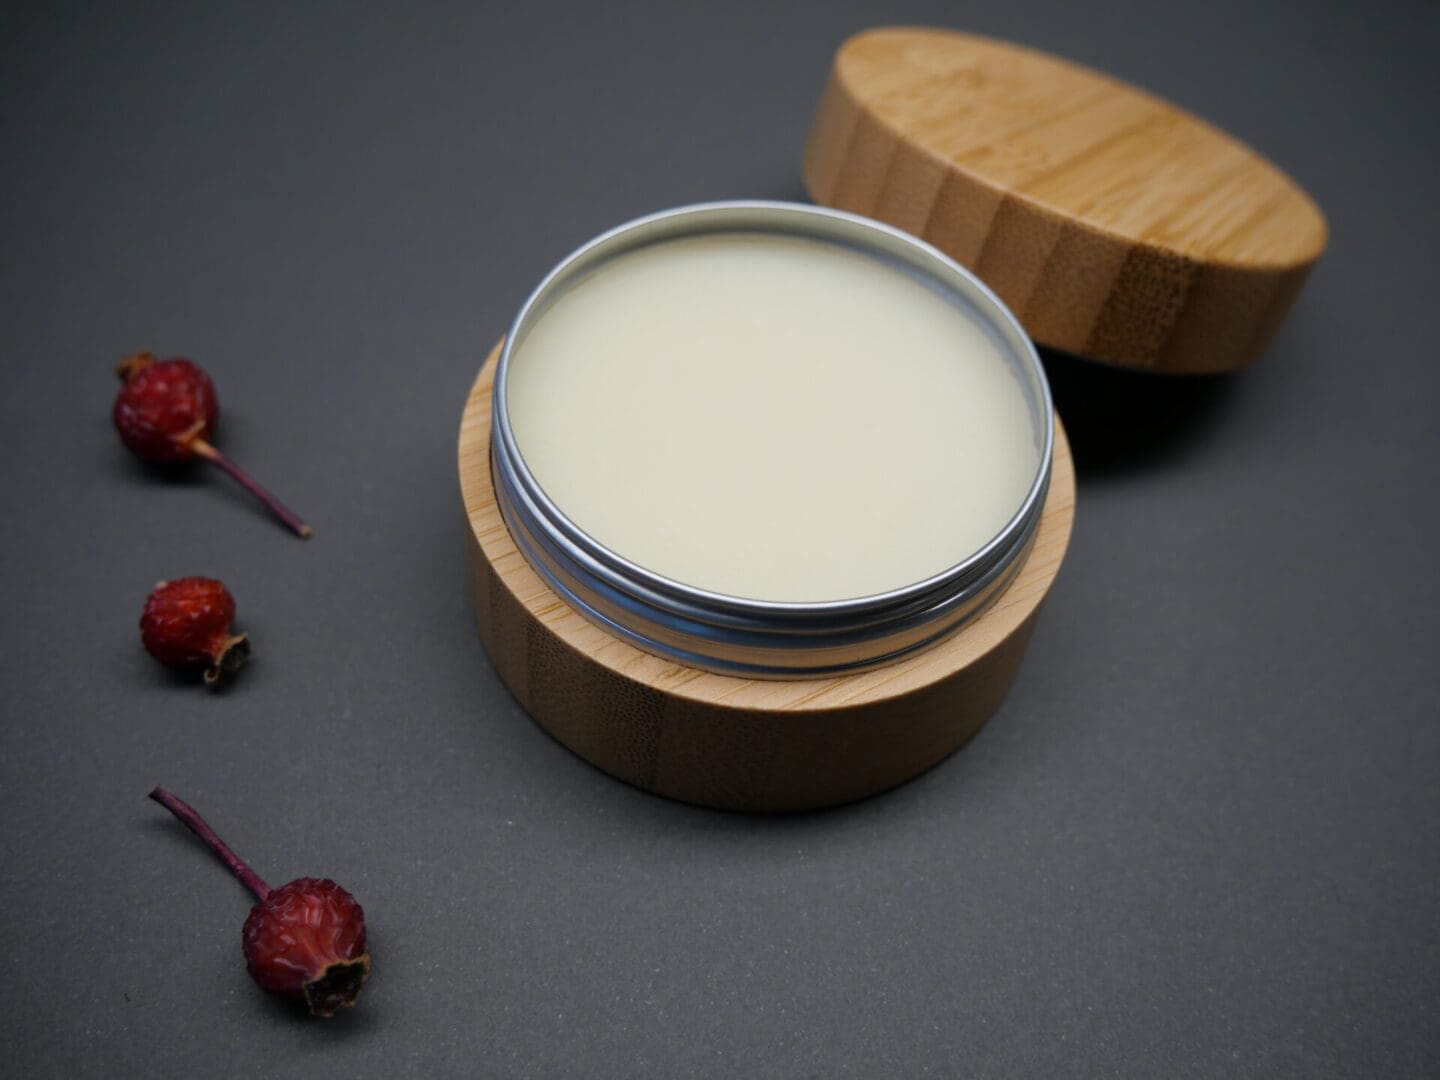 A natural wooden tin containing a soothing BreuRx Massage & Foot Butter Balm.